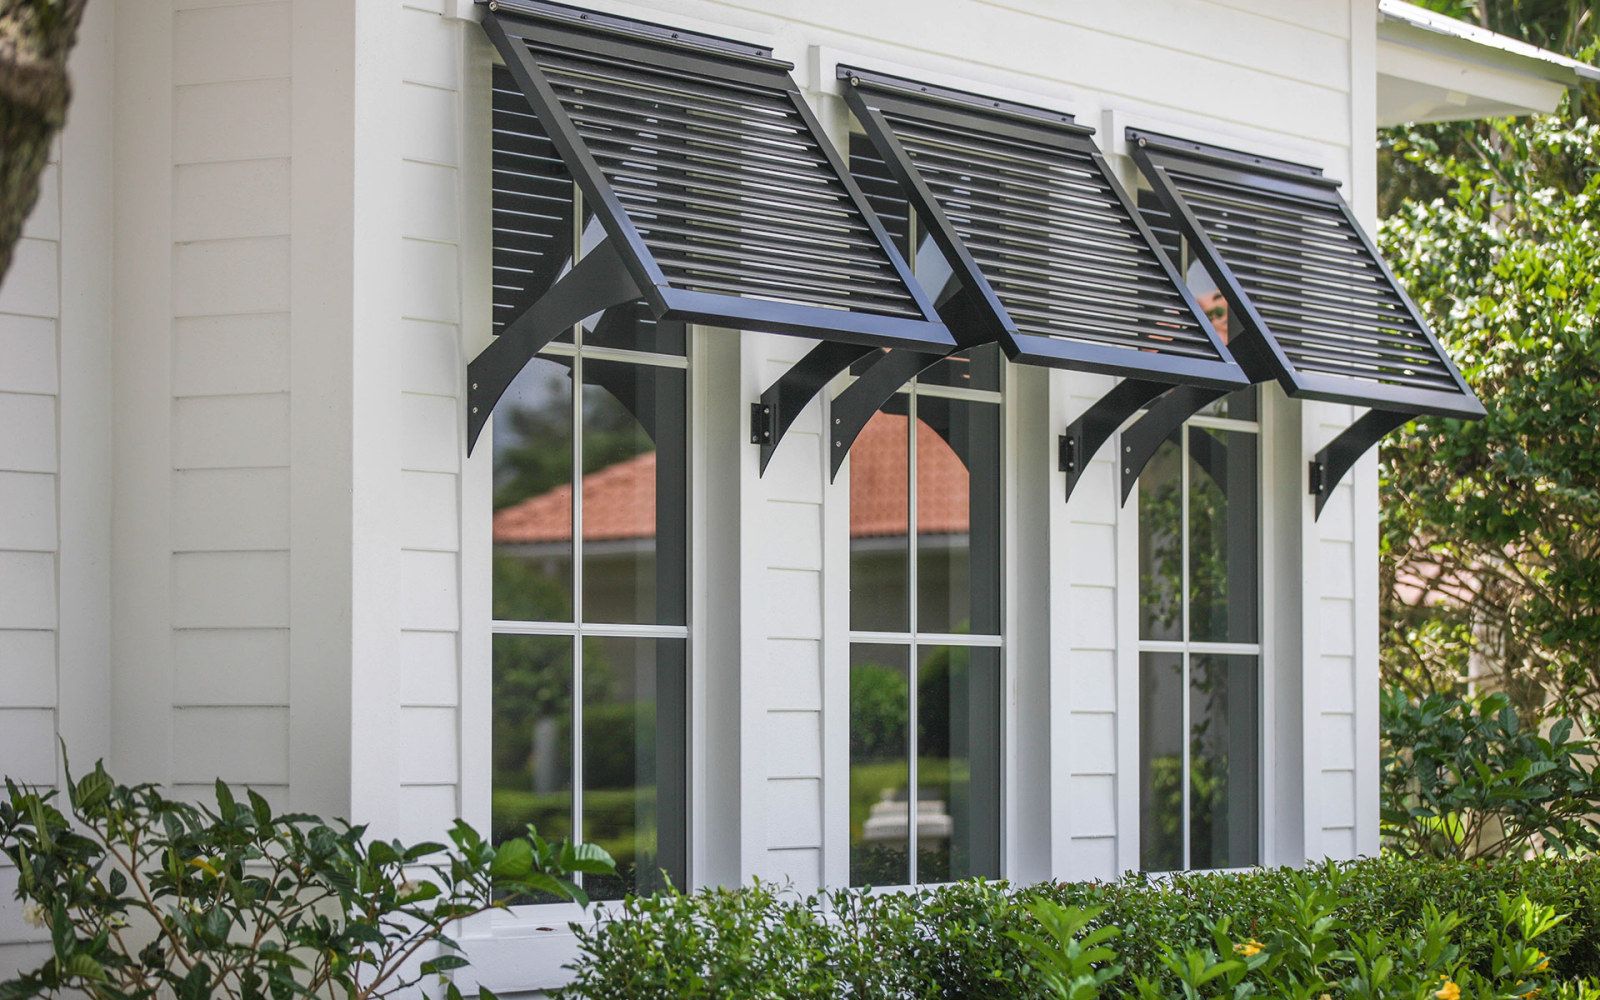 What are Bahamian shutters and what are
their advantages and disadvantages?